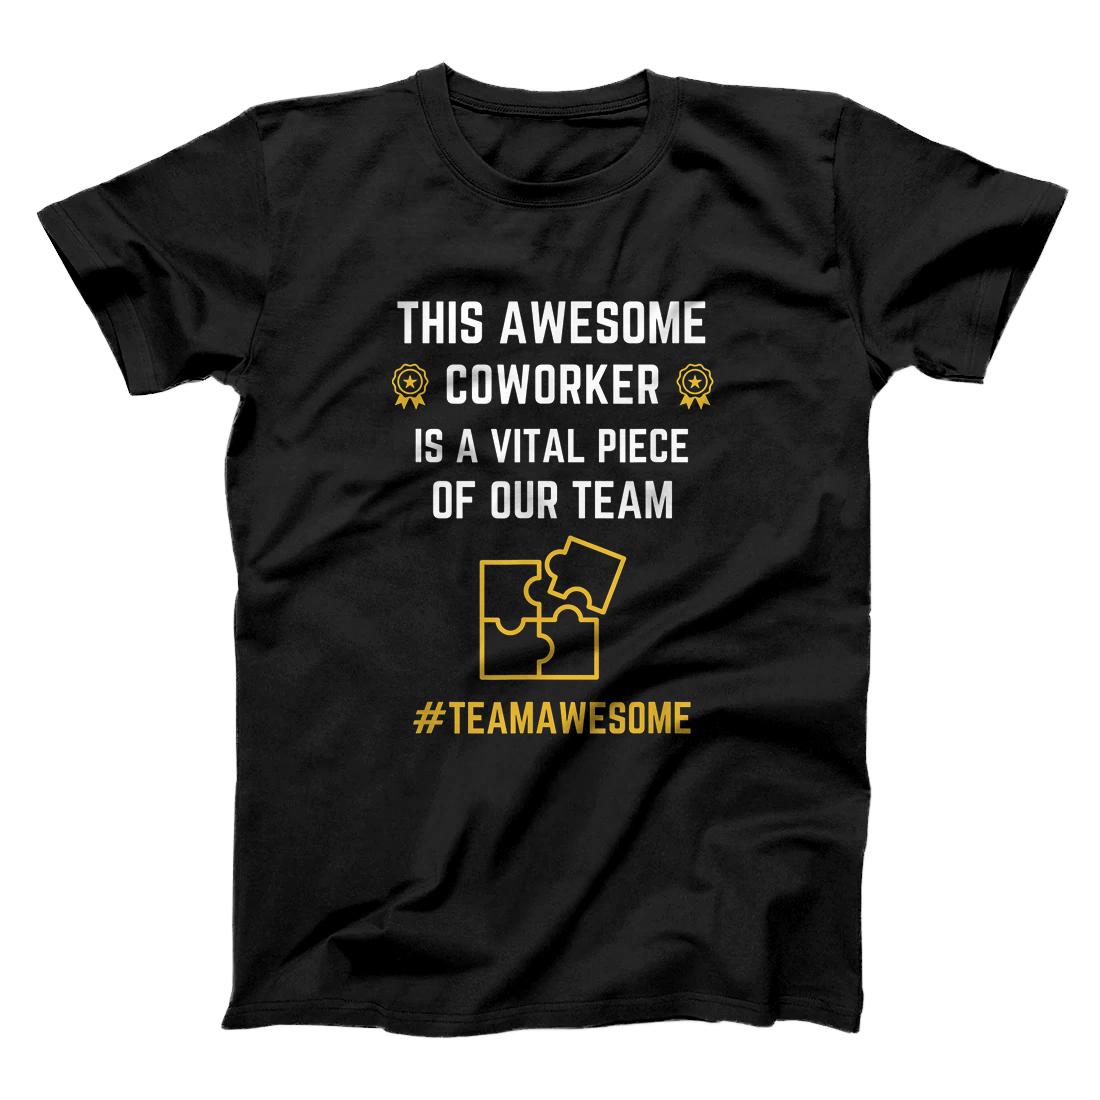 Personalized Awesome Coworker Appreciation T-Shirt